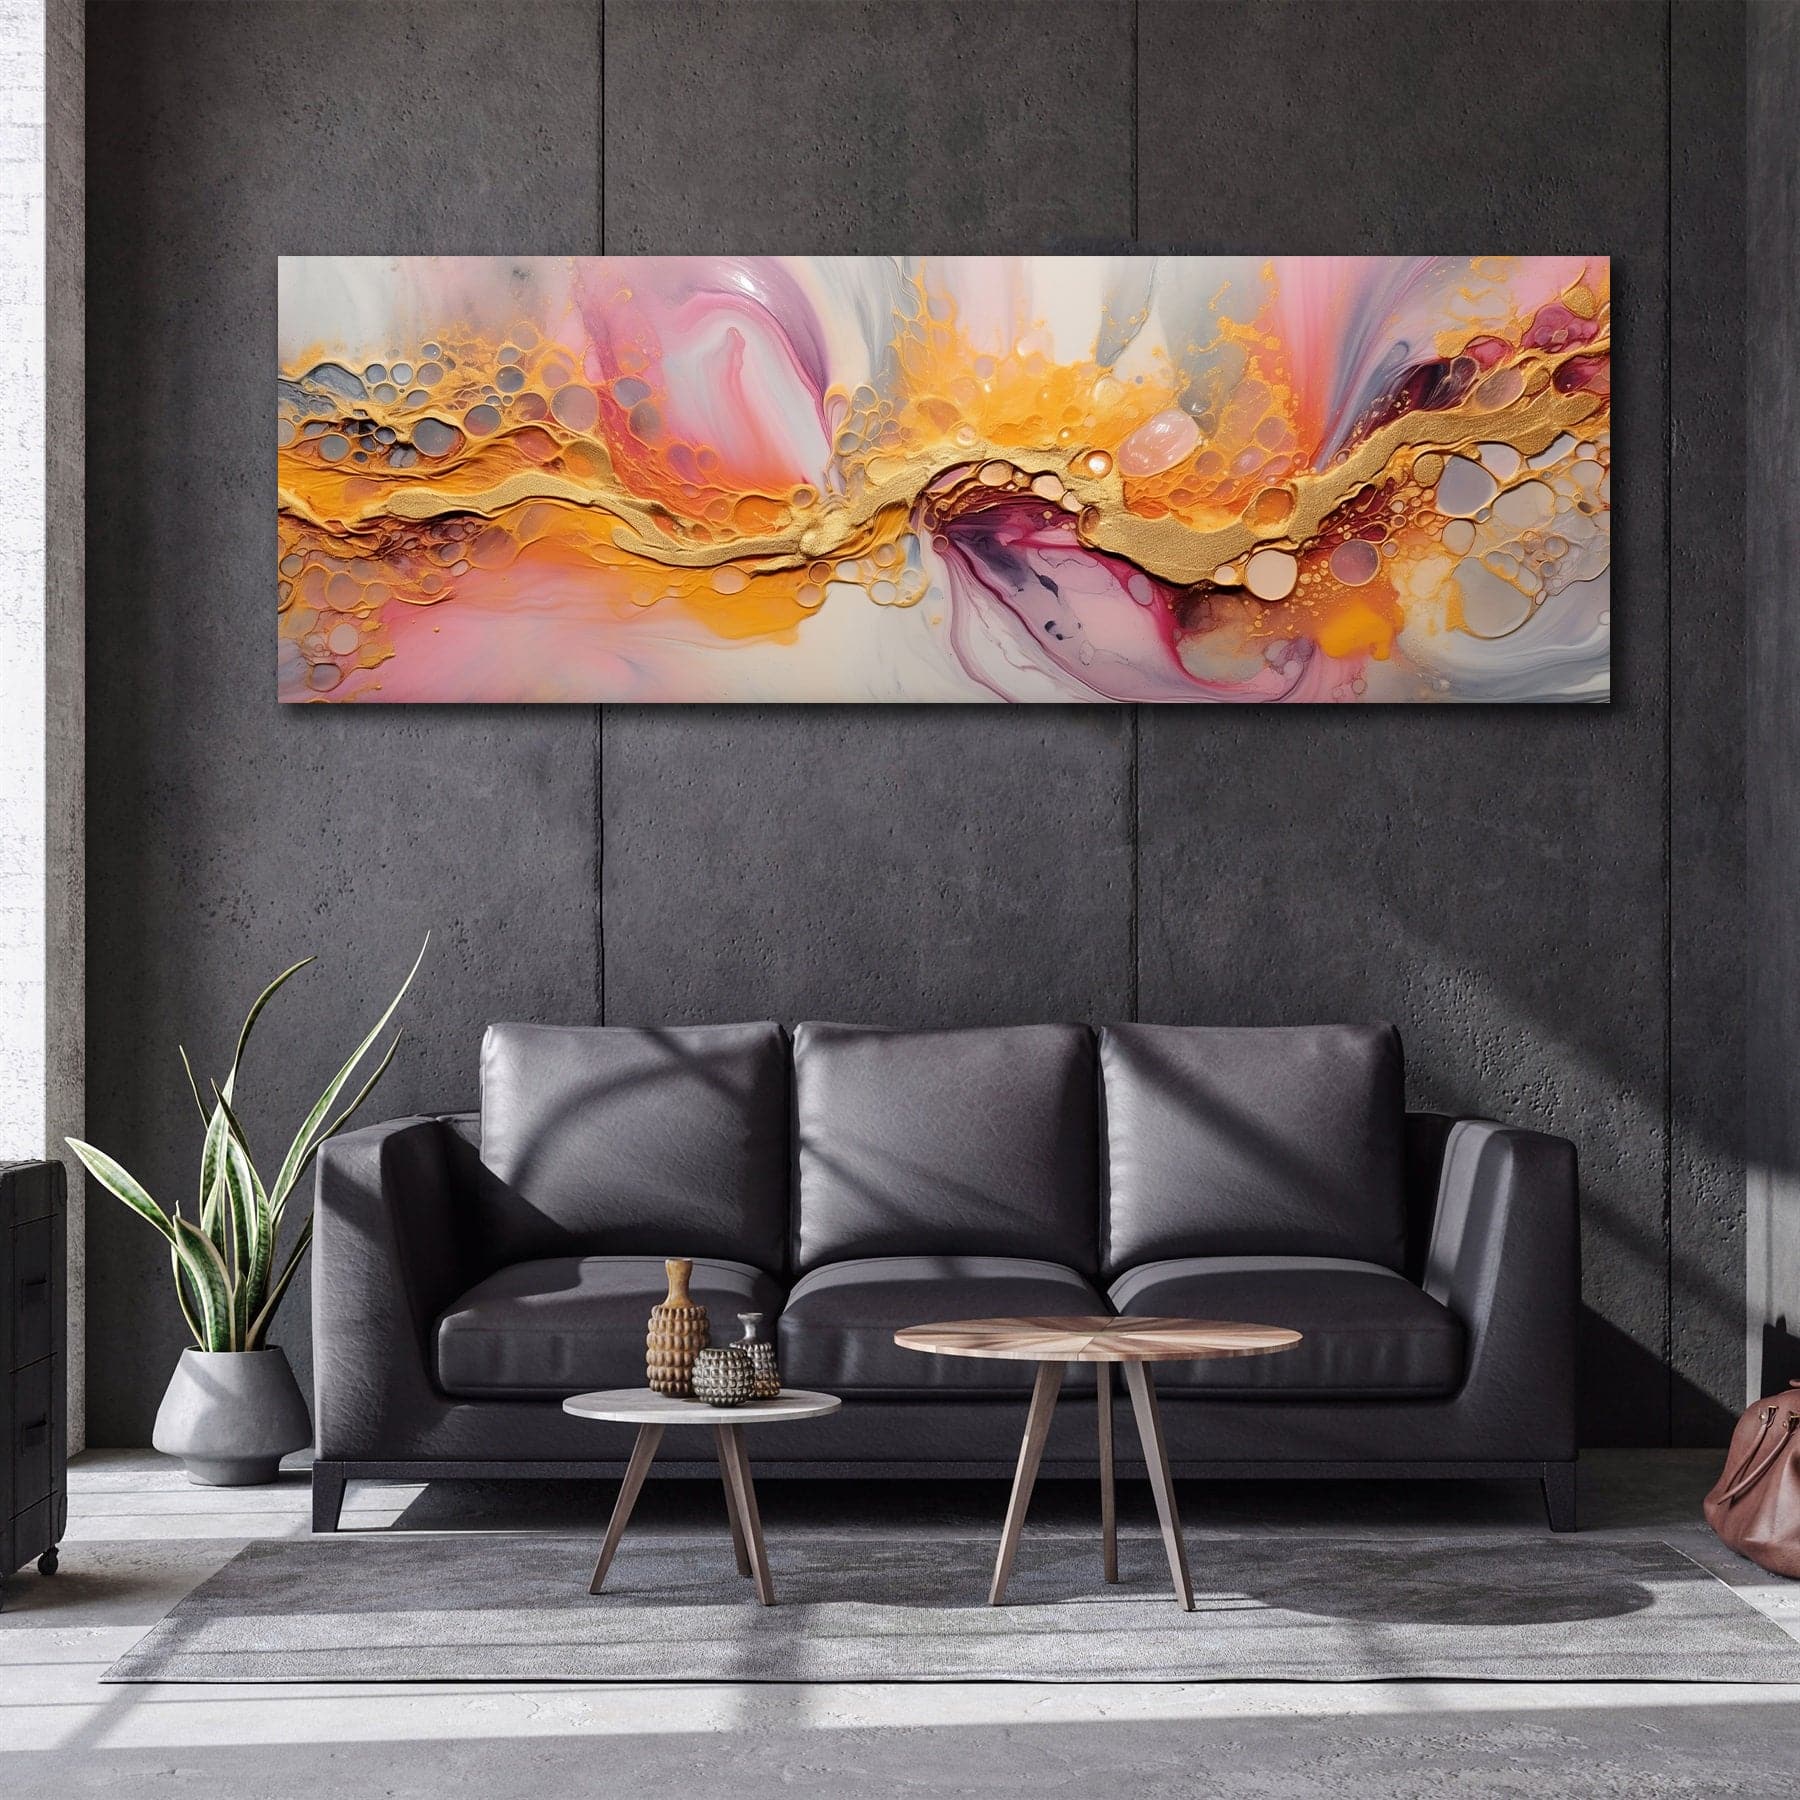 Framed 1 Panel - Natural Luxury Abstract Fluid